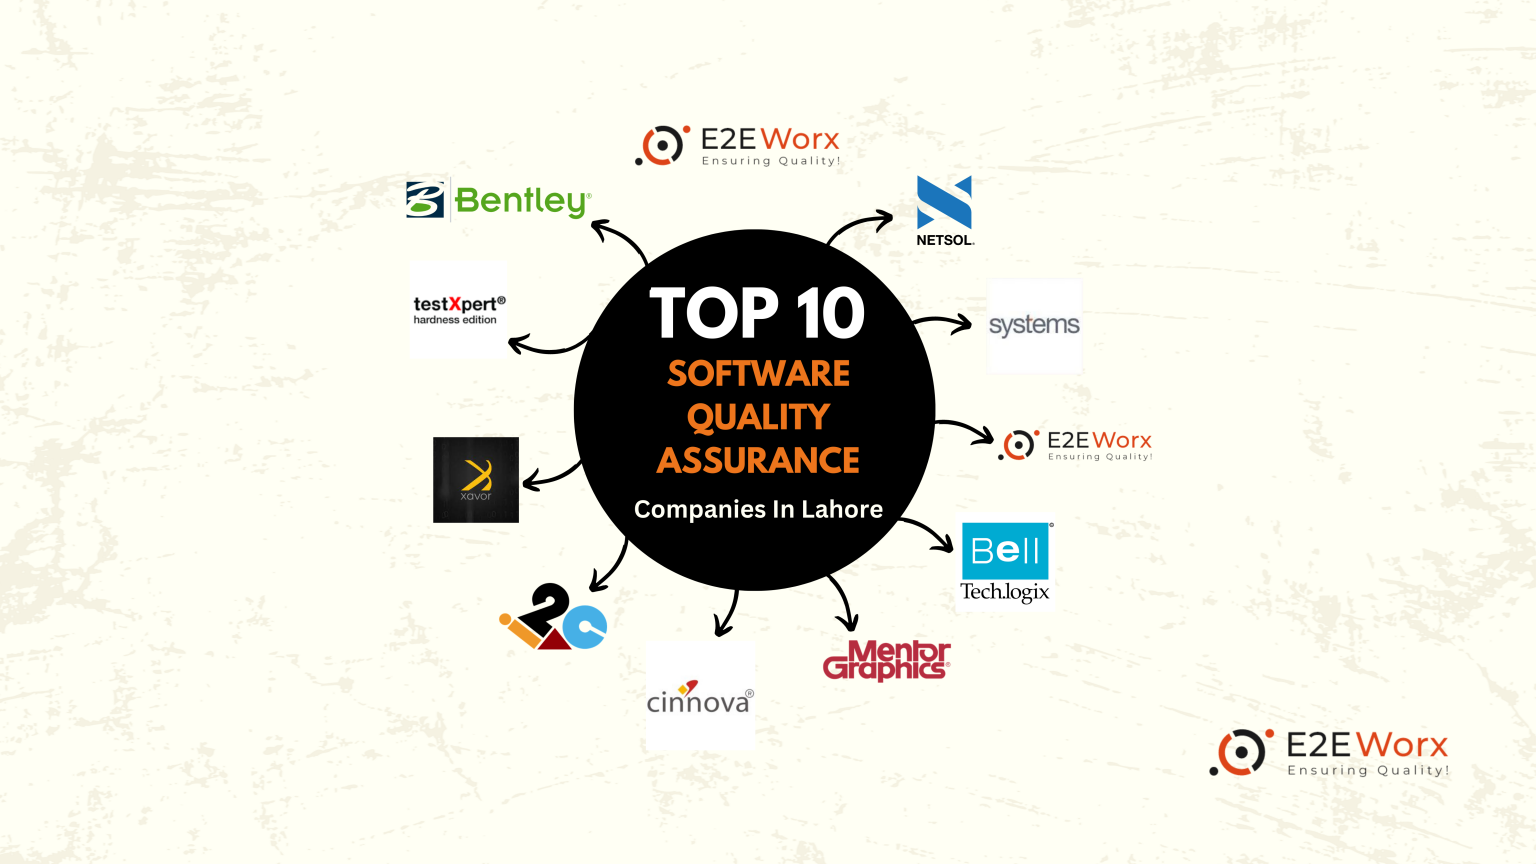 Top 10 software quality assurance companies in Lahore Pakistan - E2EWorx Ensuring Quality.png